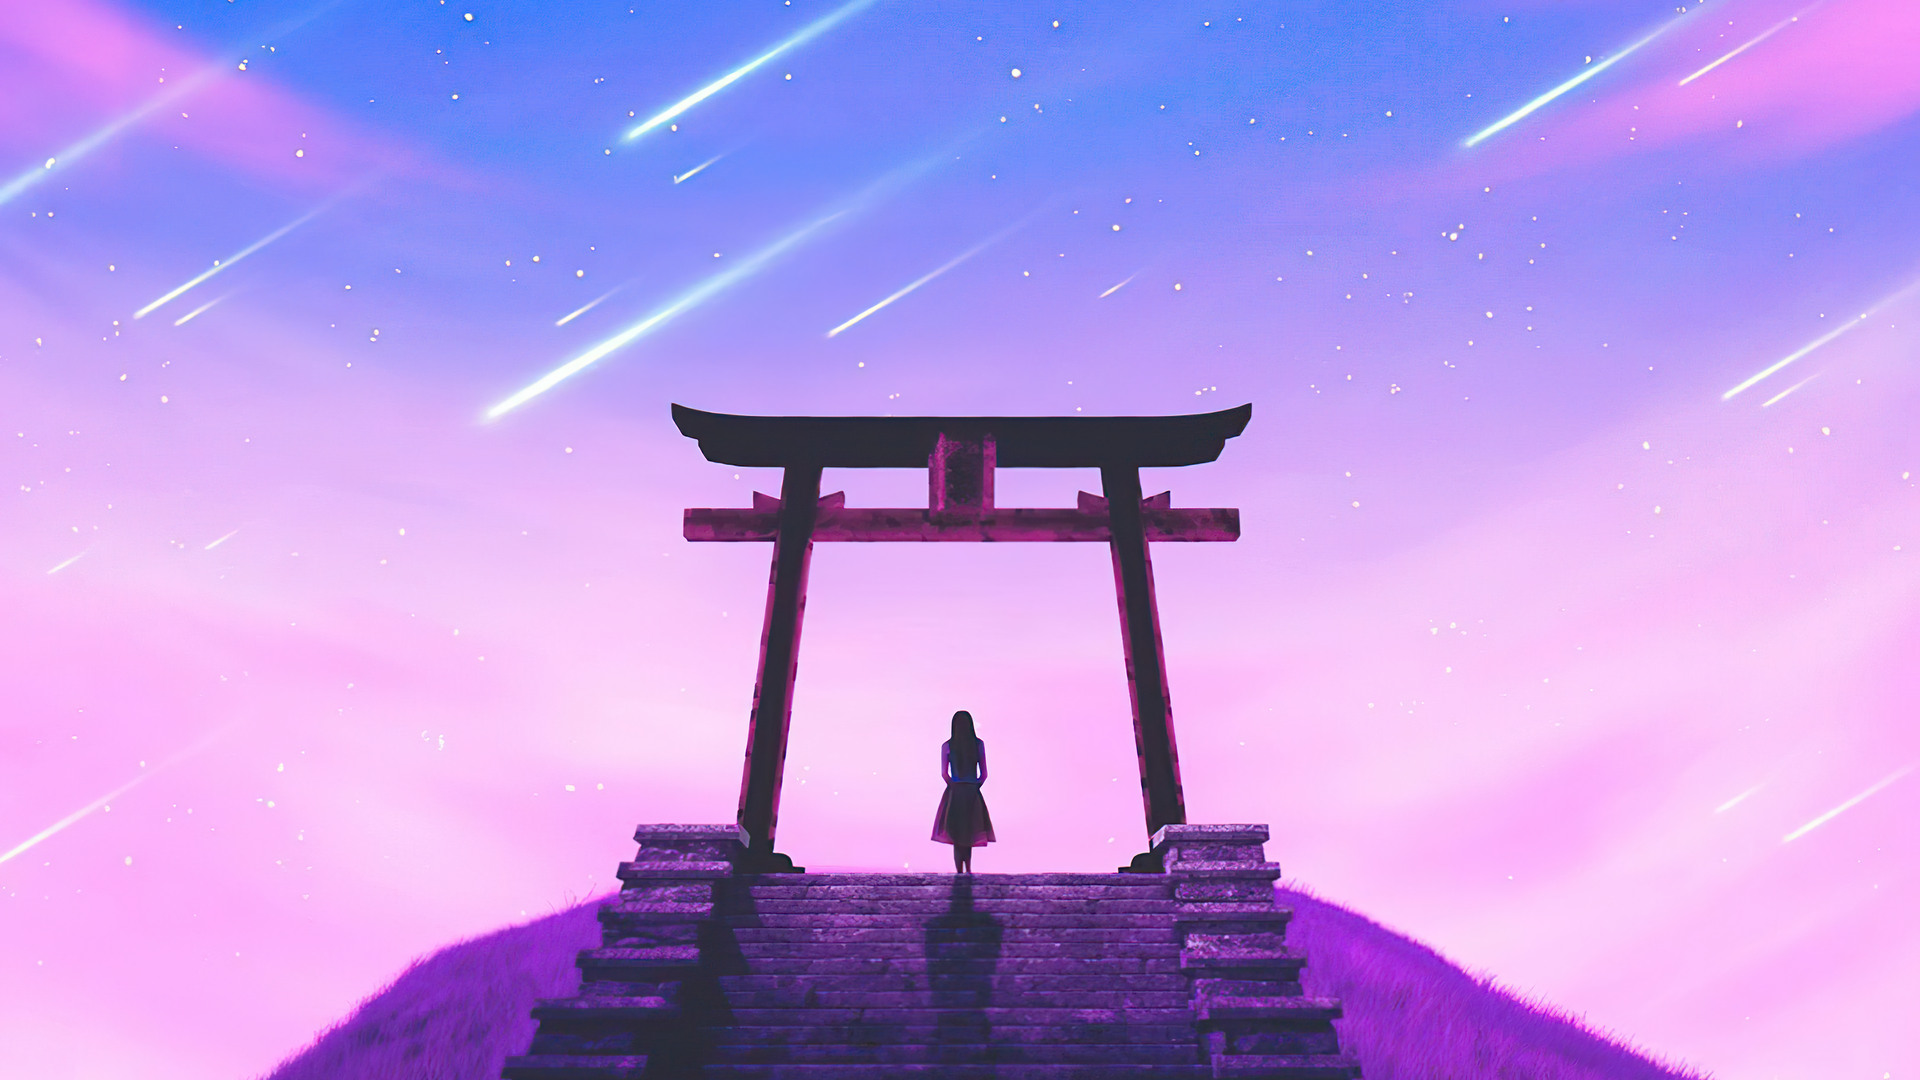 General 1920x1080 alone purple background simple background shooting stars Asian architecture torii